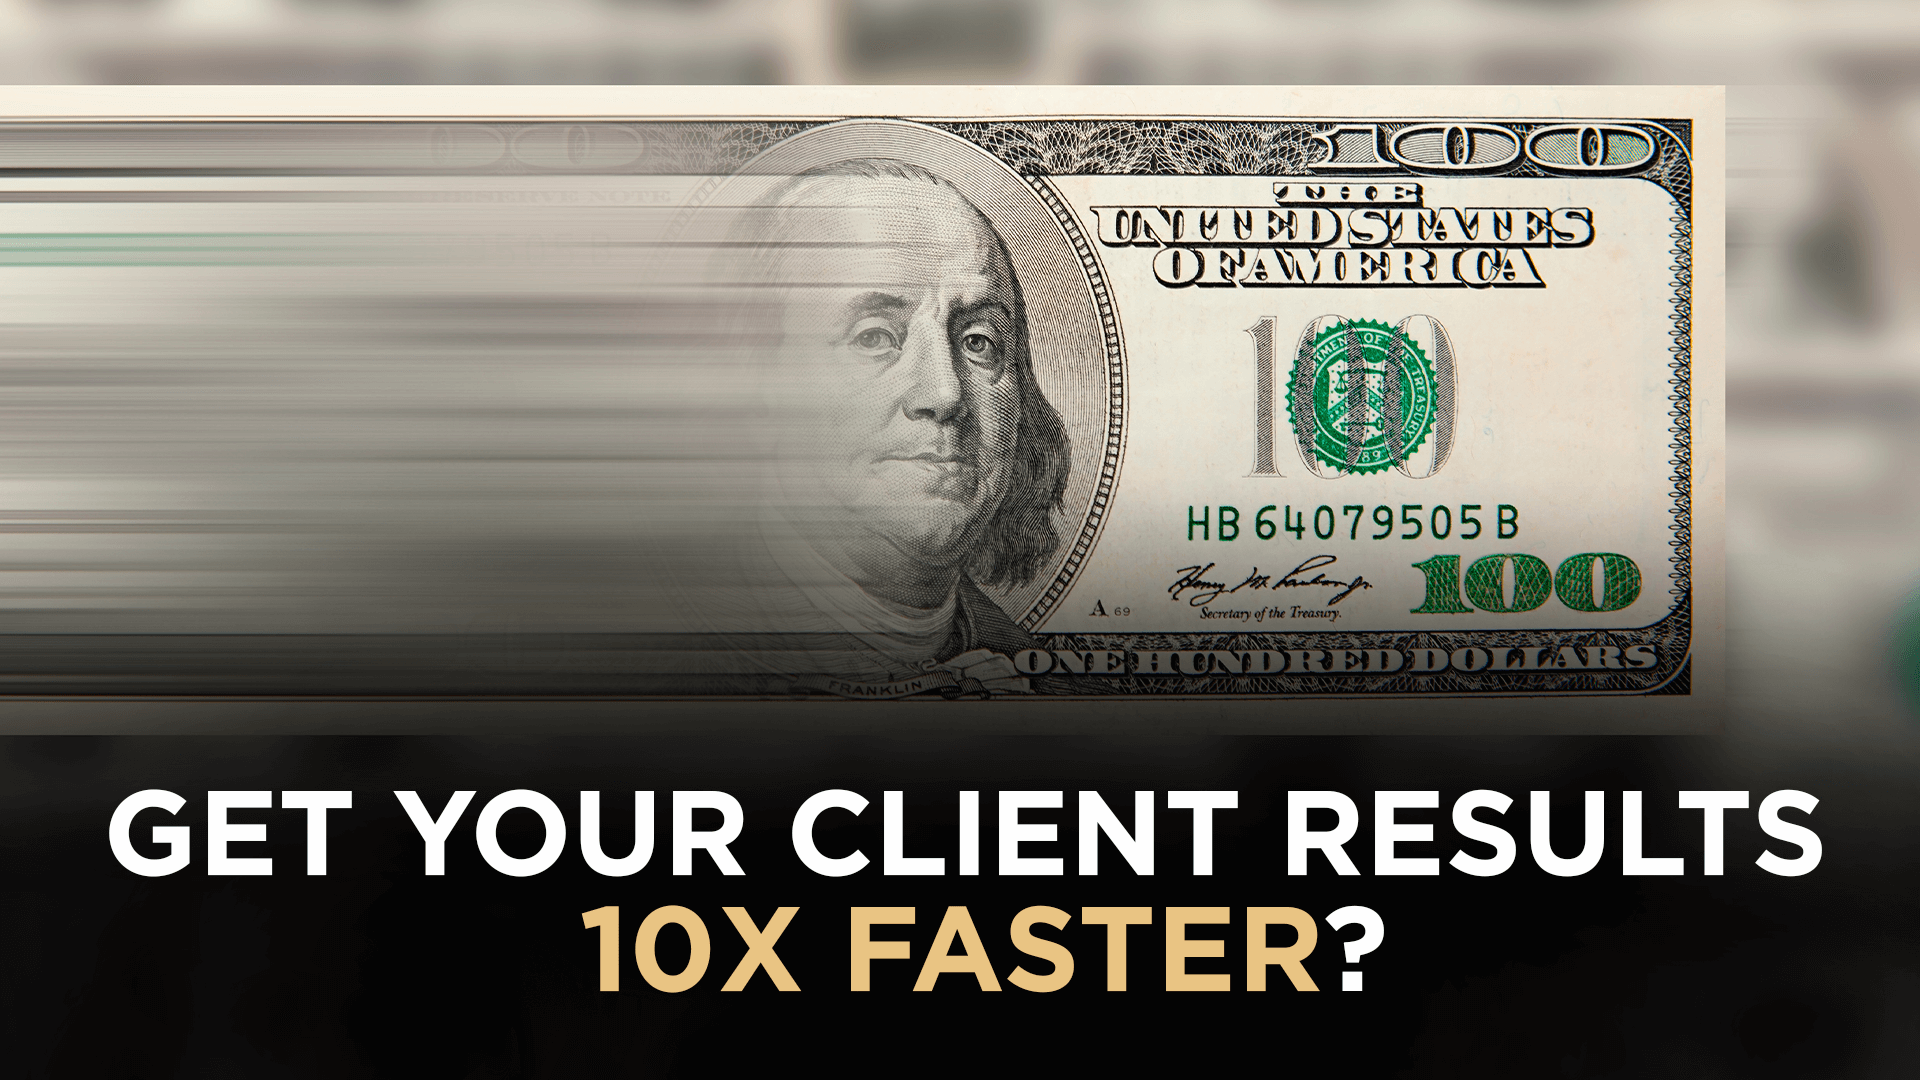 Get Your Client Results 10x Faster